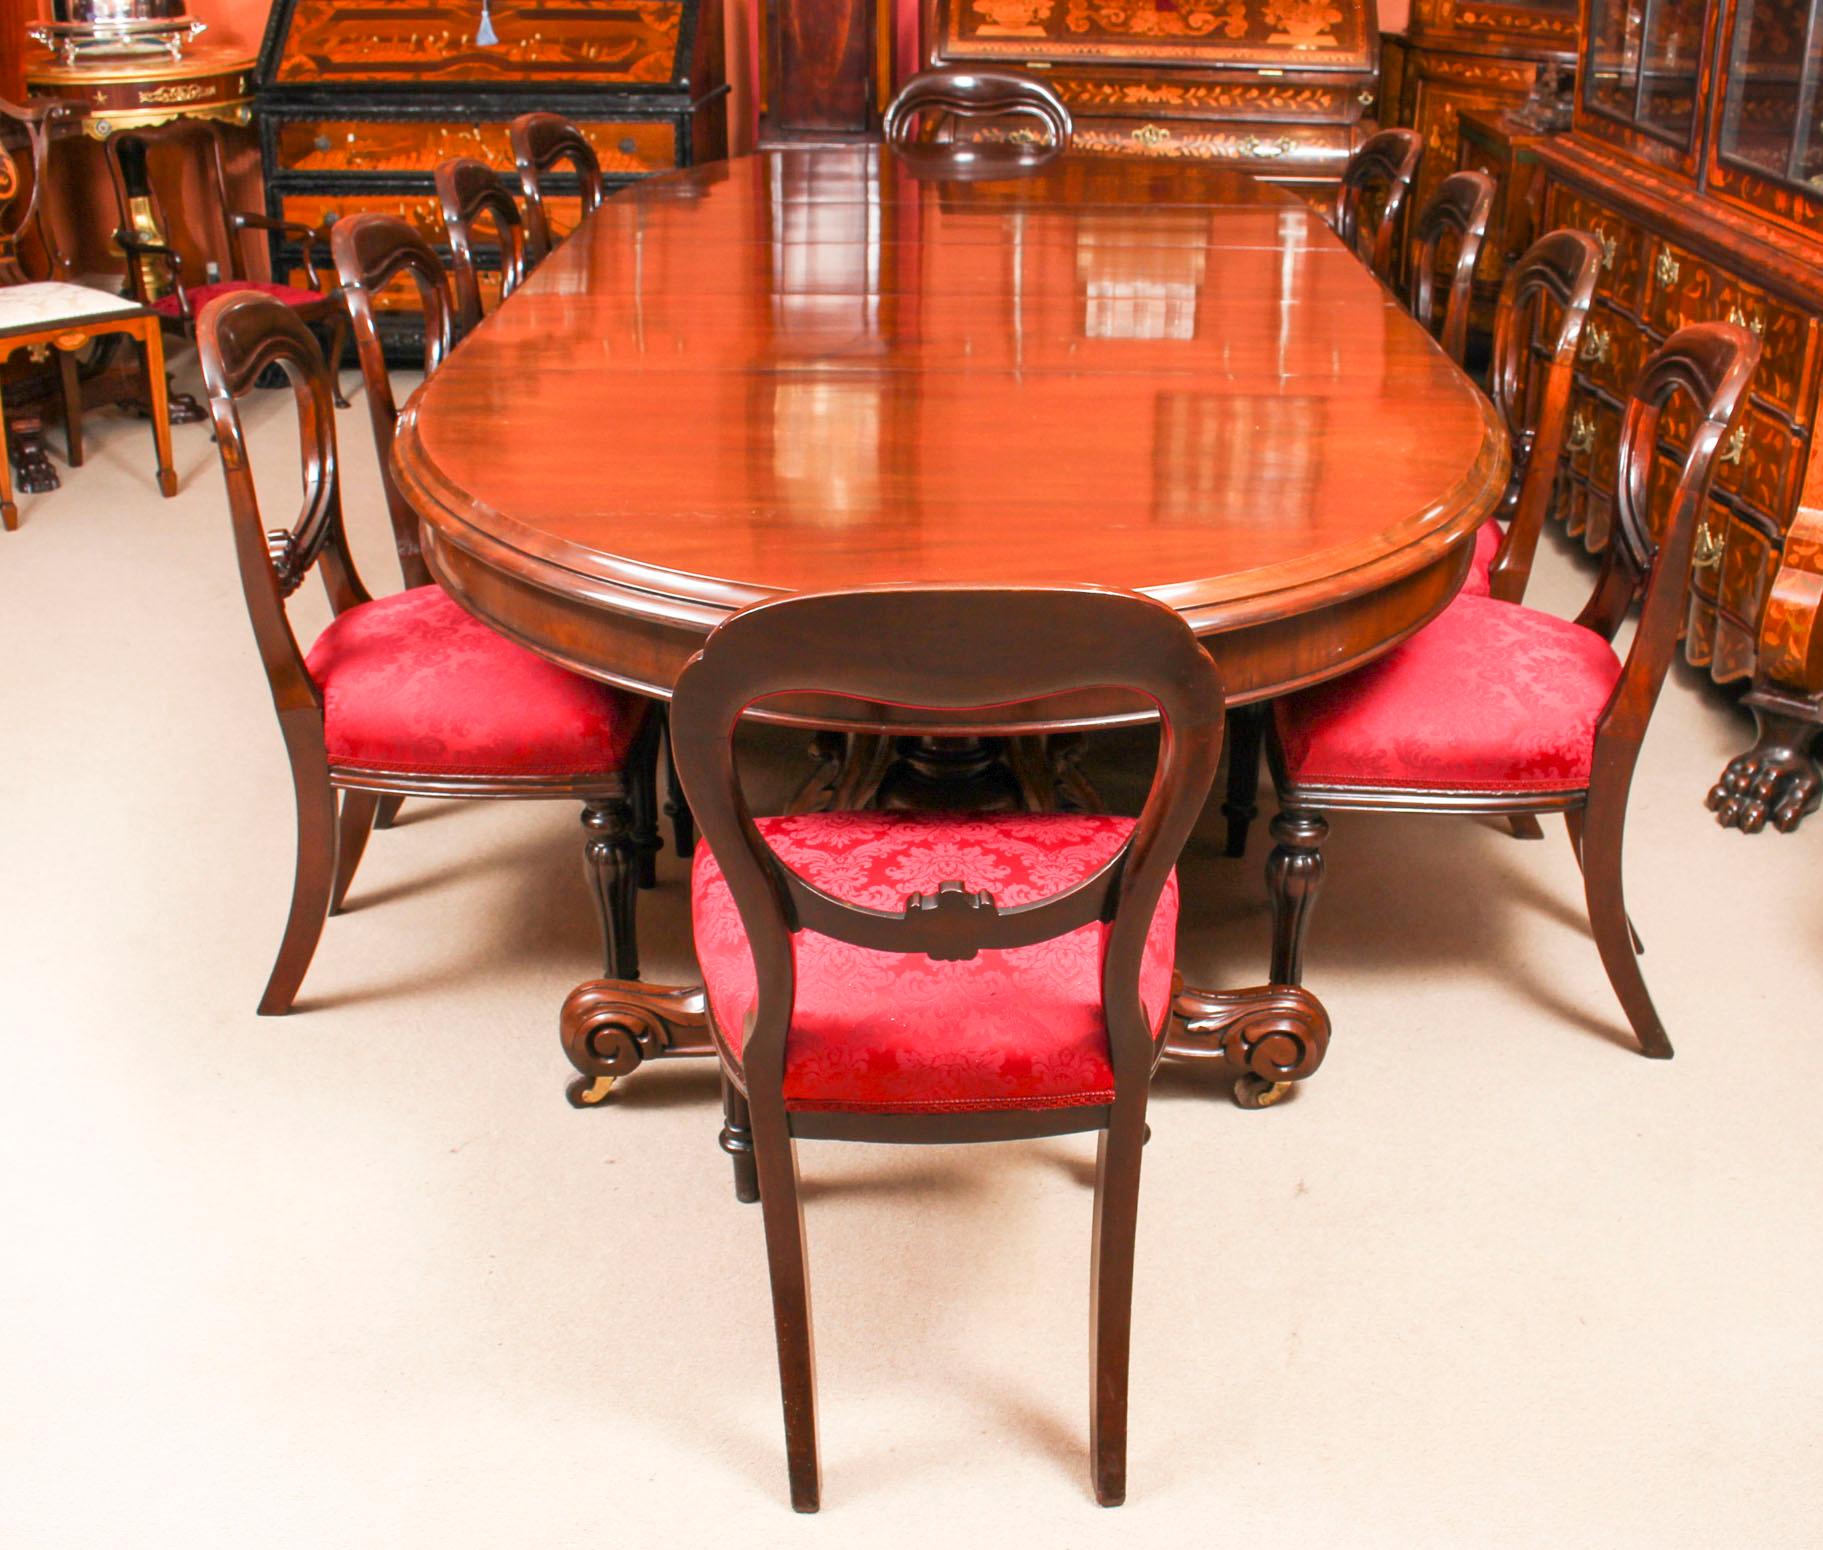 A fantastic antique Victorian dining set comprising an antique Victorian mahogany twin pedestal base dining table Circa 1865 in date and ten antique Victorian dining chairs, circa 1850 in date.
 
The oval shaped table is made from solid mahogany